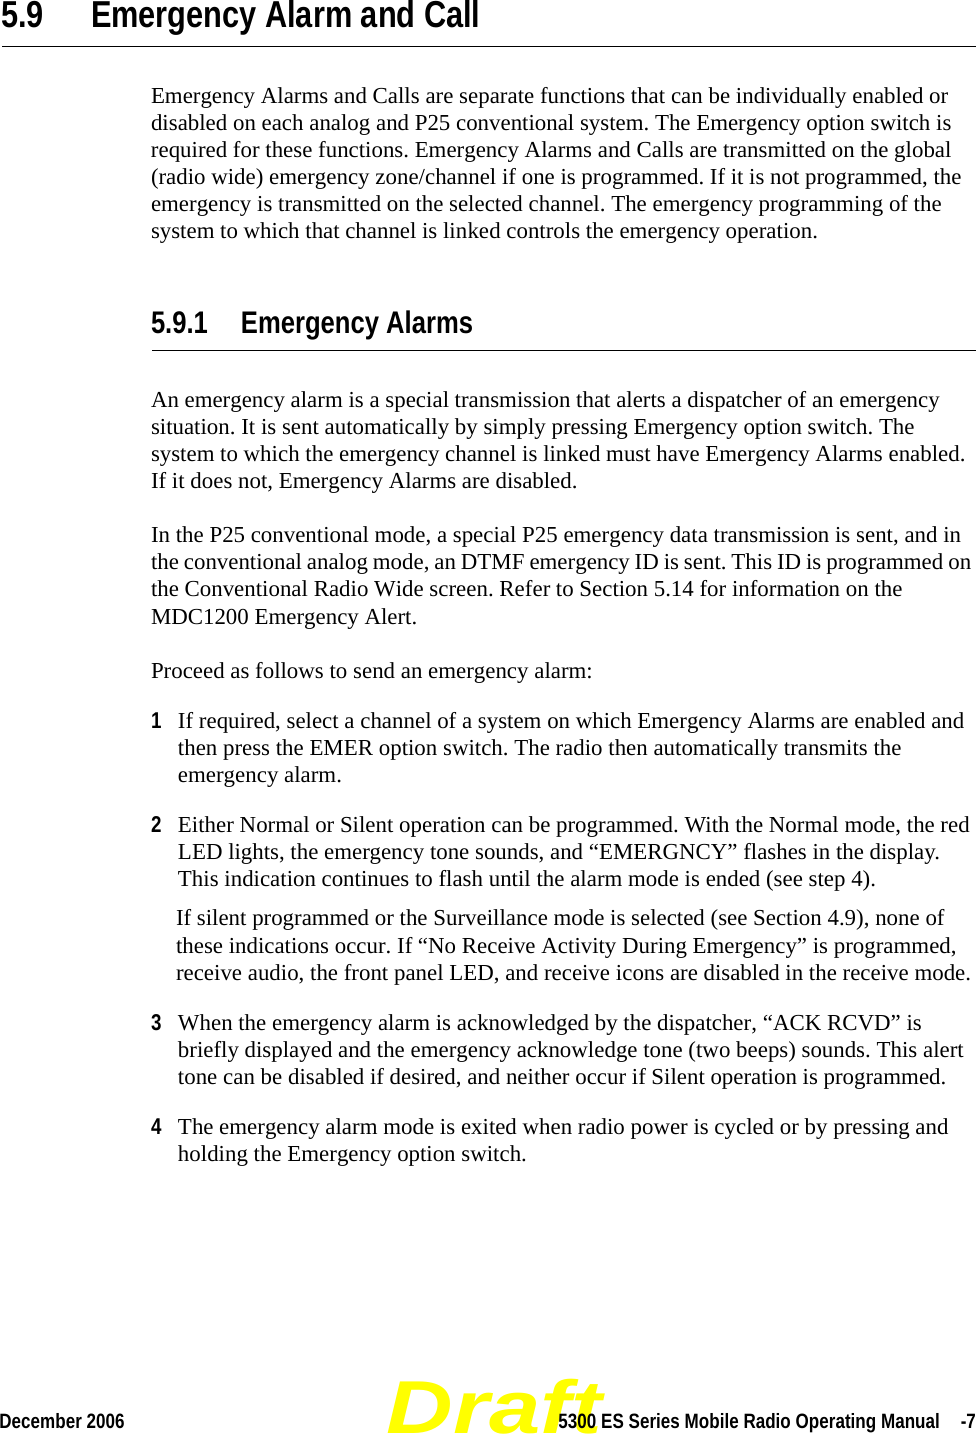 DraftDecember 2006 5300 ES Series Mobile Radio Operating Manual  -75.9 Emergency Alarm and CallEmergency Alarms and Calls are separate functions that can be individually enabled or disabled on each analog and P25 conventional system. The Emergency option switch is required for these functions. Emergency Alarms and Calls are transmitted on the global (radio wide) emergency zone/channel if one is programmed. If it is not programmed, the emergency is transmitted on the selected channel. The emergency programming of the system to which that channel is linked controls the emergency operation.5.9.1 Emergency AlarmsAn emergency alarm is a special transmission that alerts a dispatcher of an emergency situation. It is sent automatically by simply pressing Emergency option switch. The system to which the emergency channel is linked must have Emergency Alarms enabled. If it does not, Emergency Alarms are disabled.In the P25 conventional mode, a special P25 emergency data transmission is sent, and in the conventional analog mode, an DTMF emergency ID is sent. This ID is programmed on the Conventional Radio Wide screen. Refer to Section 5.14 for information on the MDC1200 Emergency Alert.Proceed as follows to send an emergency alarm:1If required, select a channel of a system on which Emergency Alarms are enabled and then press the EMER option switch. The radio then automatically transmits the emergency alarm.2Either Normal or Silent operation can be programmed. With the Normal mode, the red LED lights, the emergency tone sounds, and “EMERGNCY” flashes in the display. This indication continues to flash until the alarm mode is ended (see step 4).If silent programmed or the Surveillance mode is selected (see Section 4.9), none of these indications occur. If “No Receive Activity During Emergency” is programmed, receive audio, the front panel LED, and receive icons are disabled in the receive mode.3When the emergency alarm is acknowledged by the dispatcher, “ACK RCVD” is briefly displayed and the emergency acknowledge tone (two beeps) sounds. This alert tone can be disabled if desired, and neither occur if Silent operation is programmed.4The emergency alarm mode is exited when radio power is cycled or by pressing and holding the Emergency option switch.